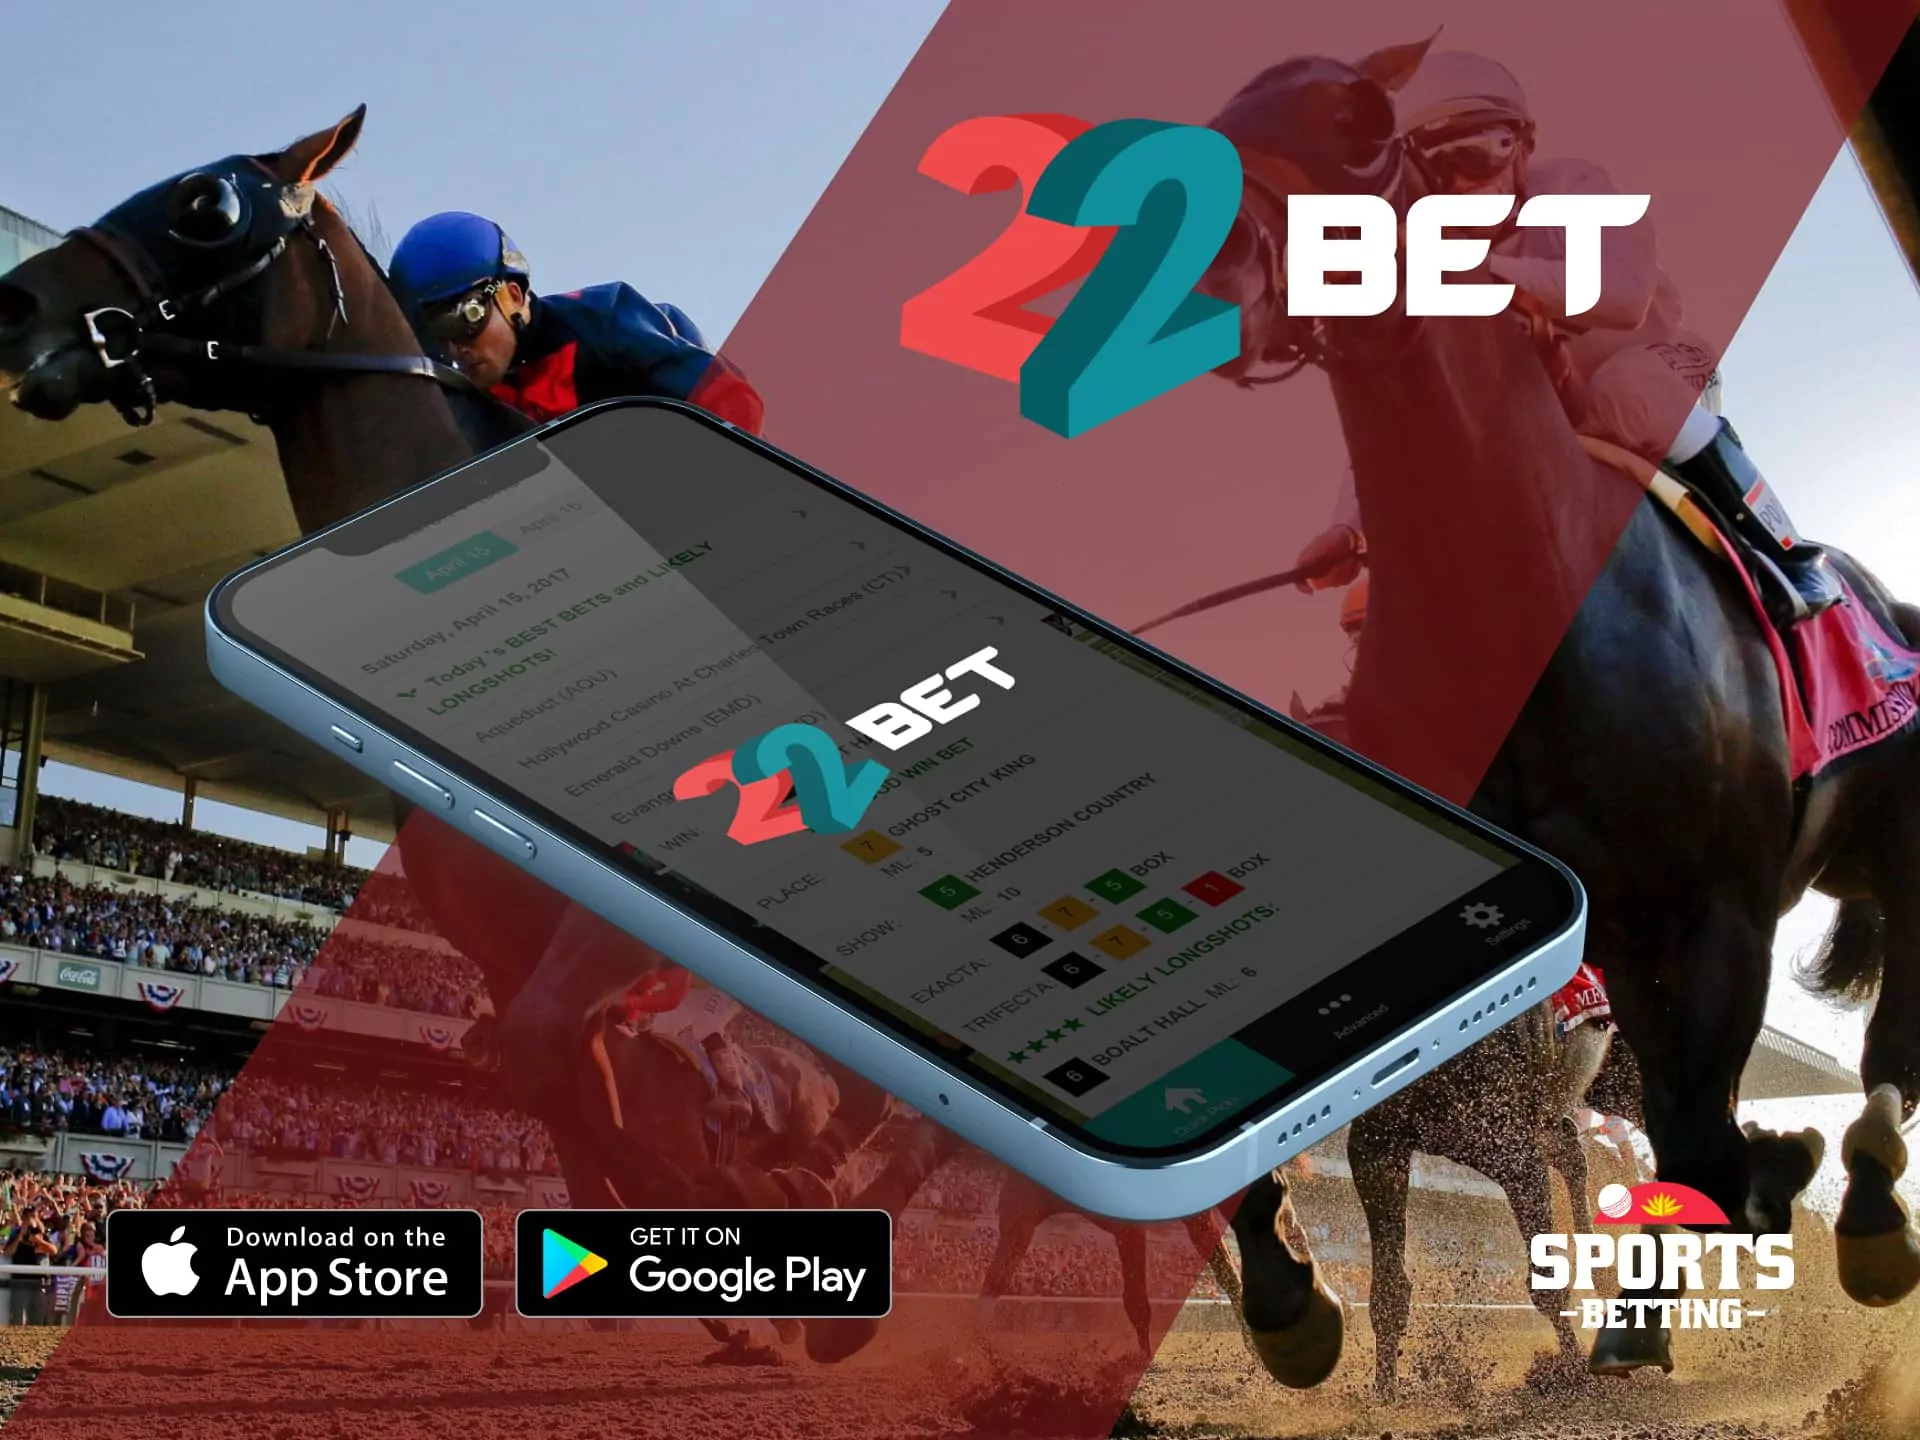 22Bet horse racing betting site with great design without being superfluous.